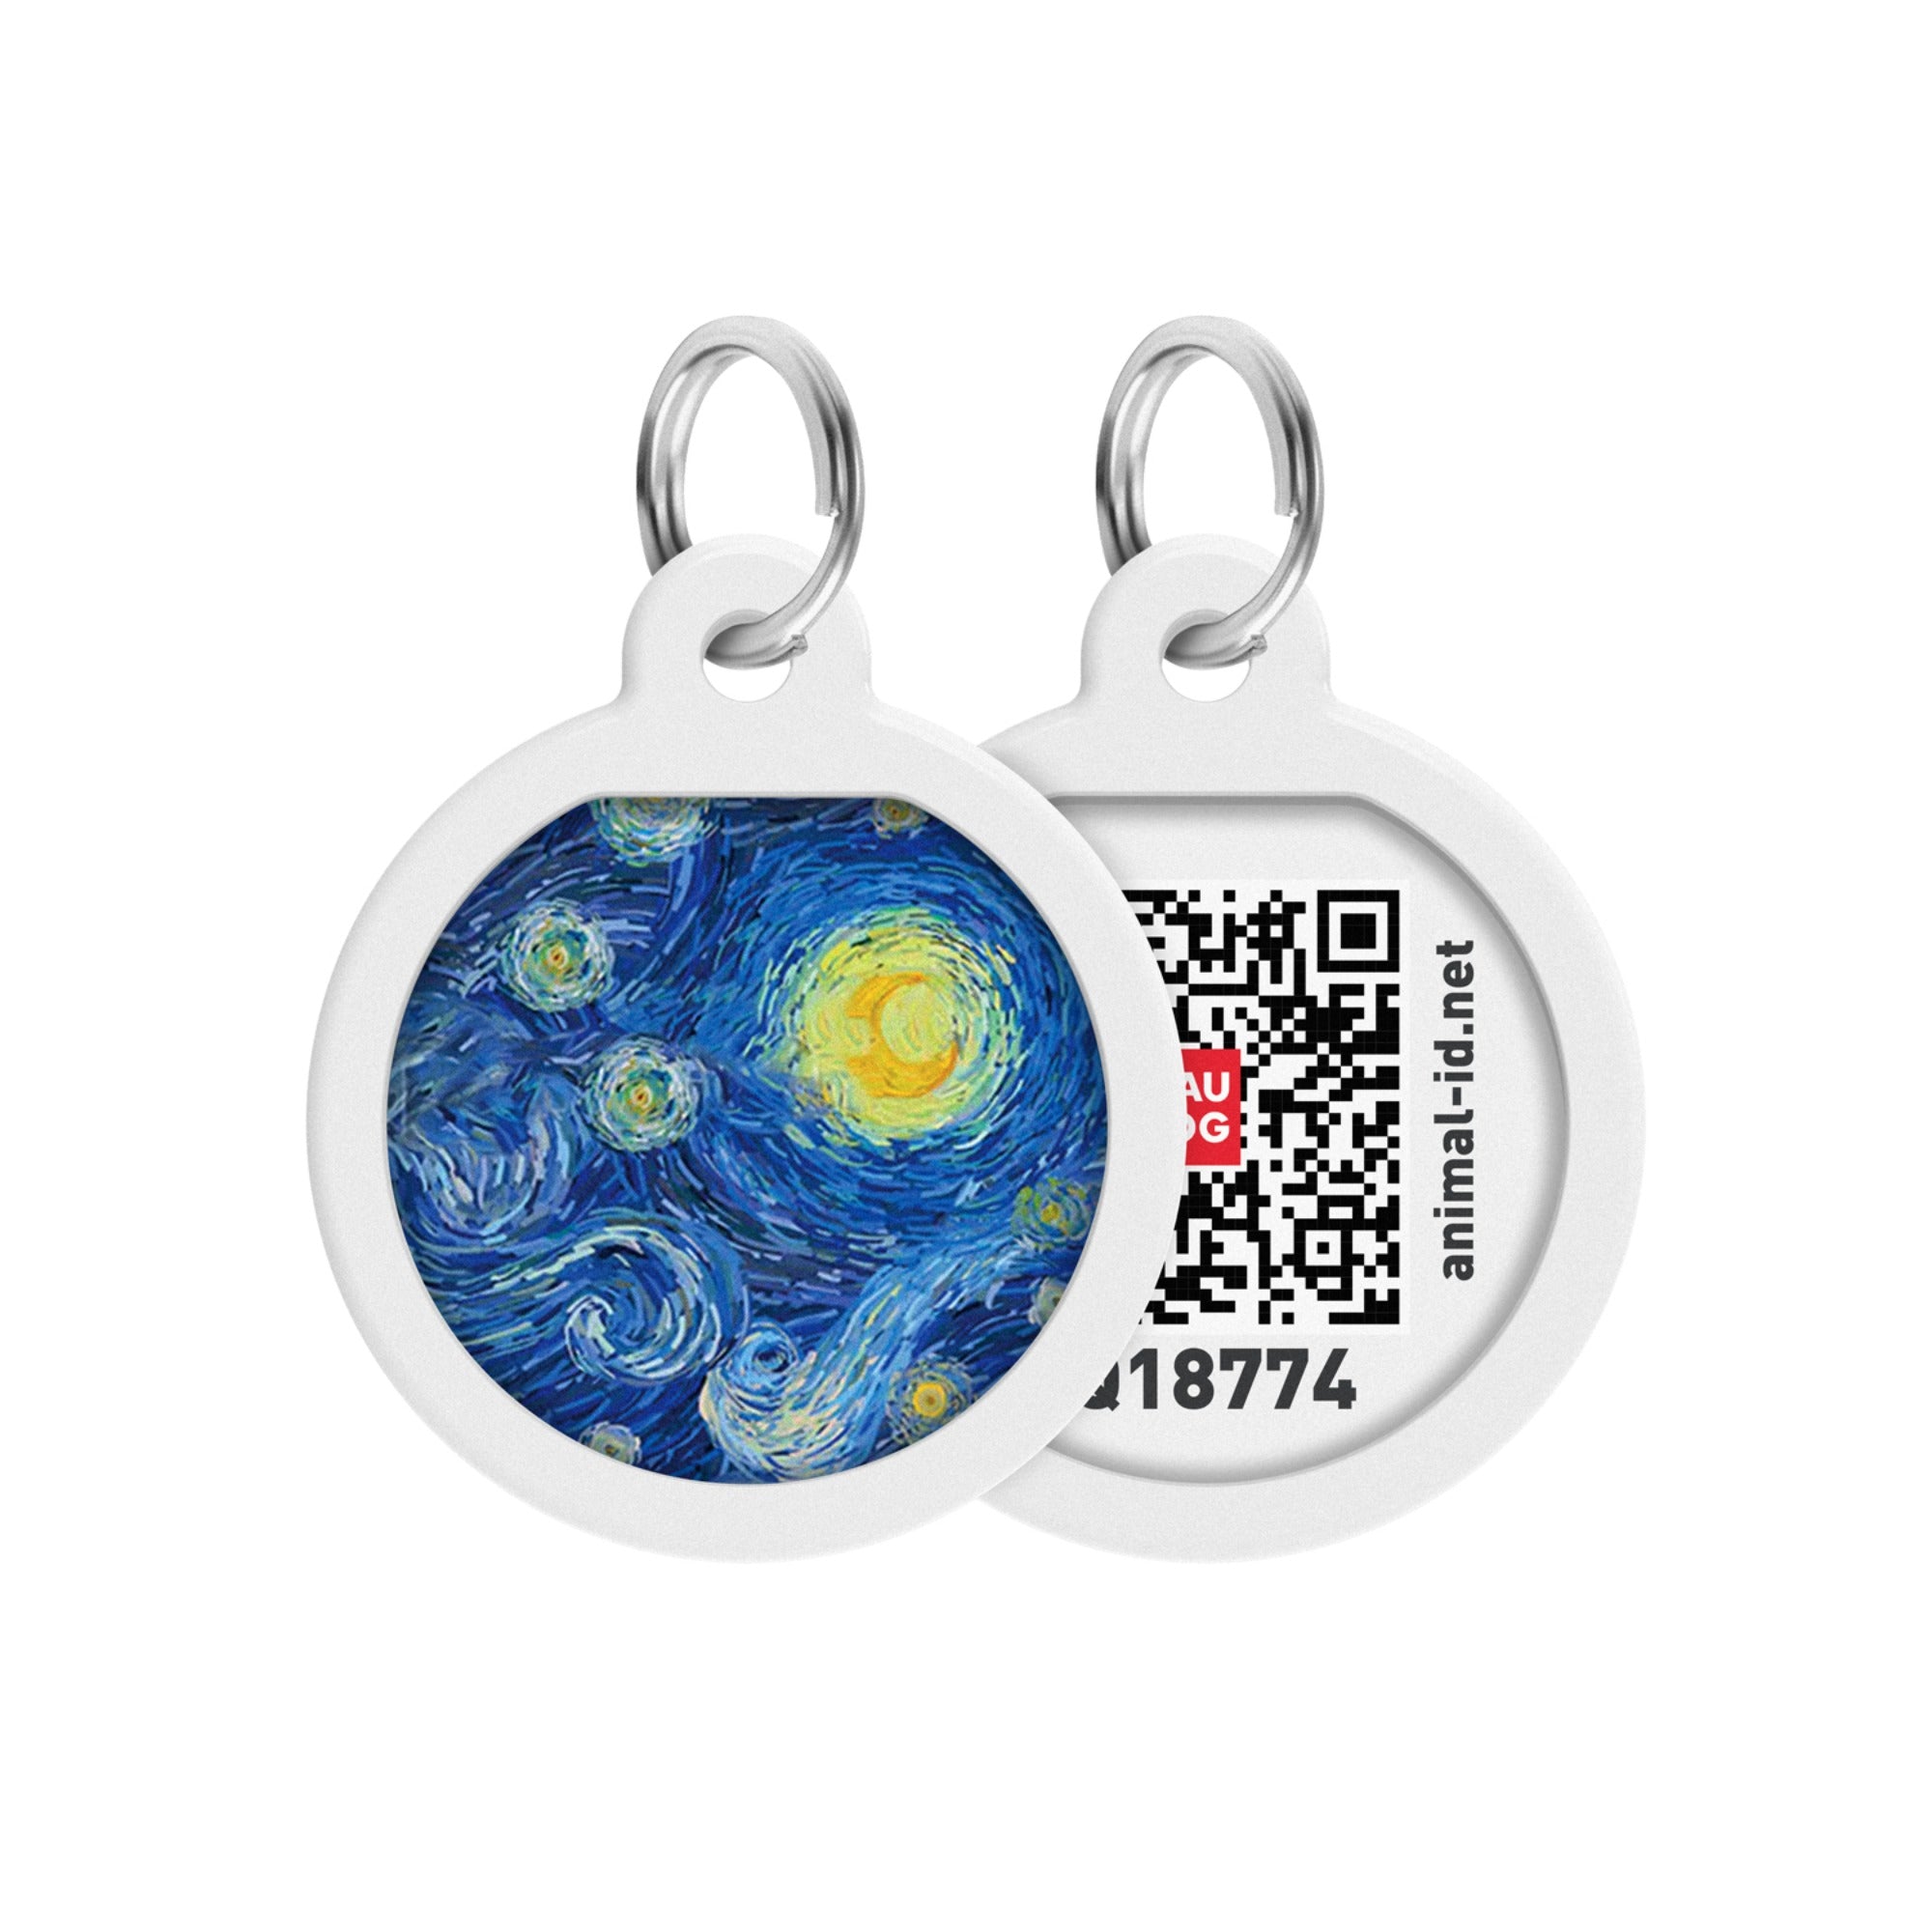 Smart ID Tag - Water Lilies design